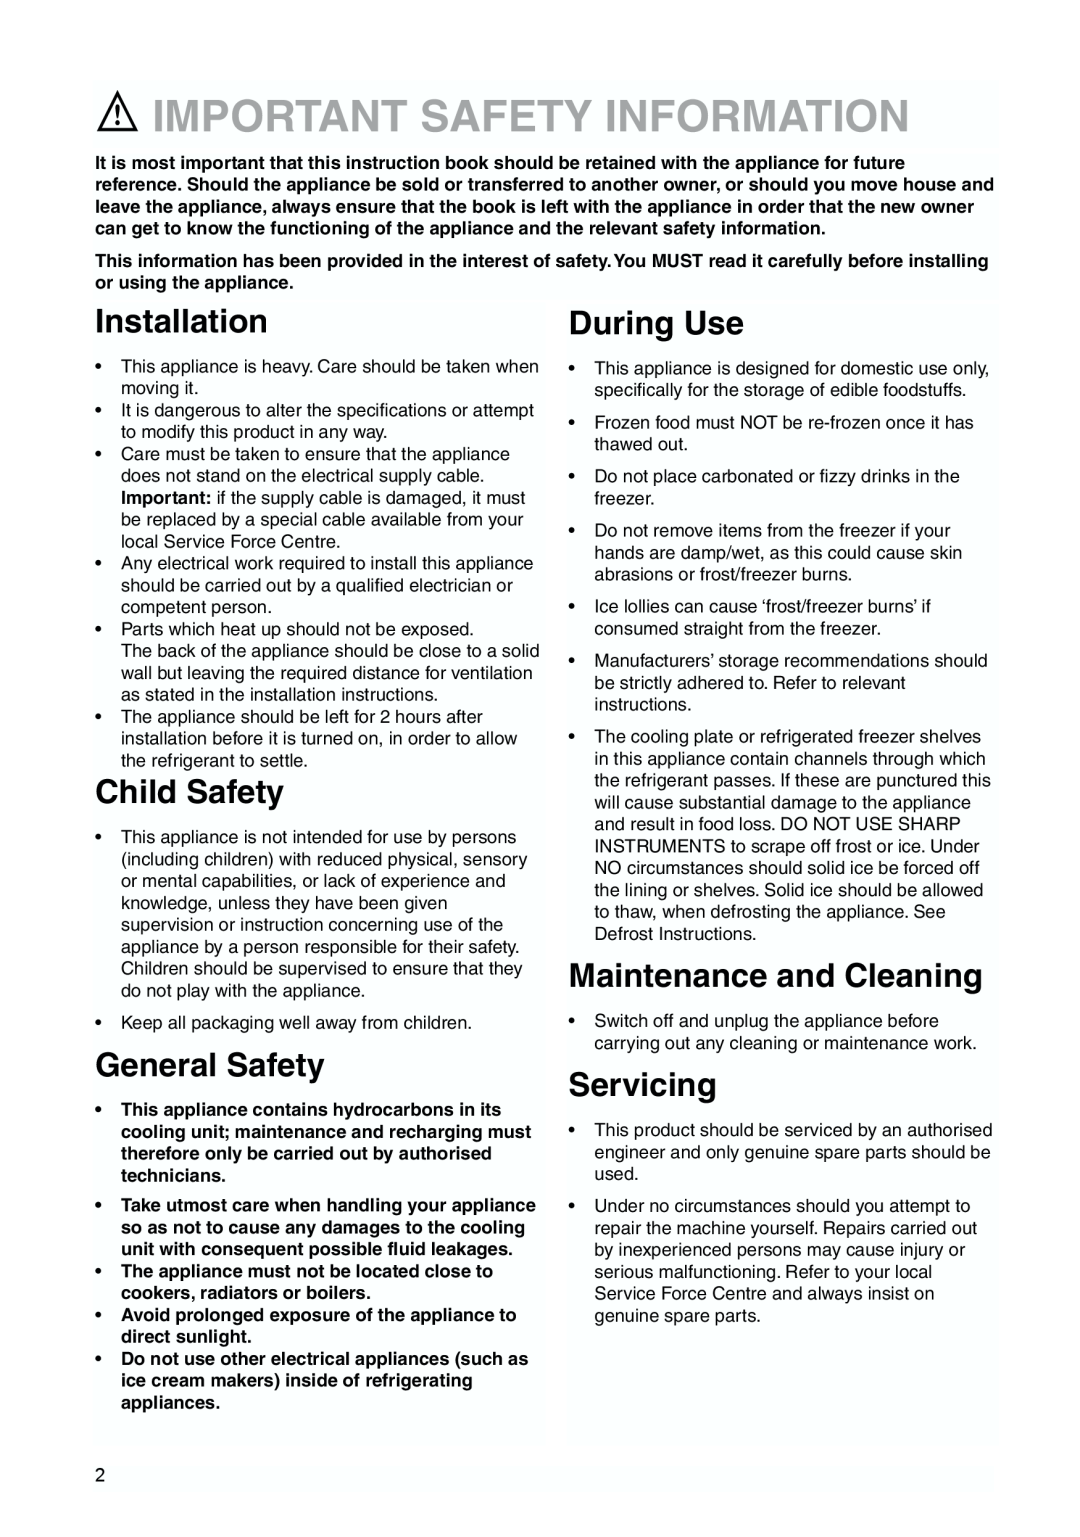 Zanussi ZQS 6124 manual Installation, Child Safety, General Safety, During Use, Maintenance and Cleaning, Servicing 